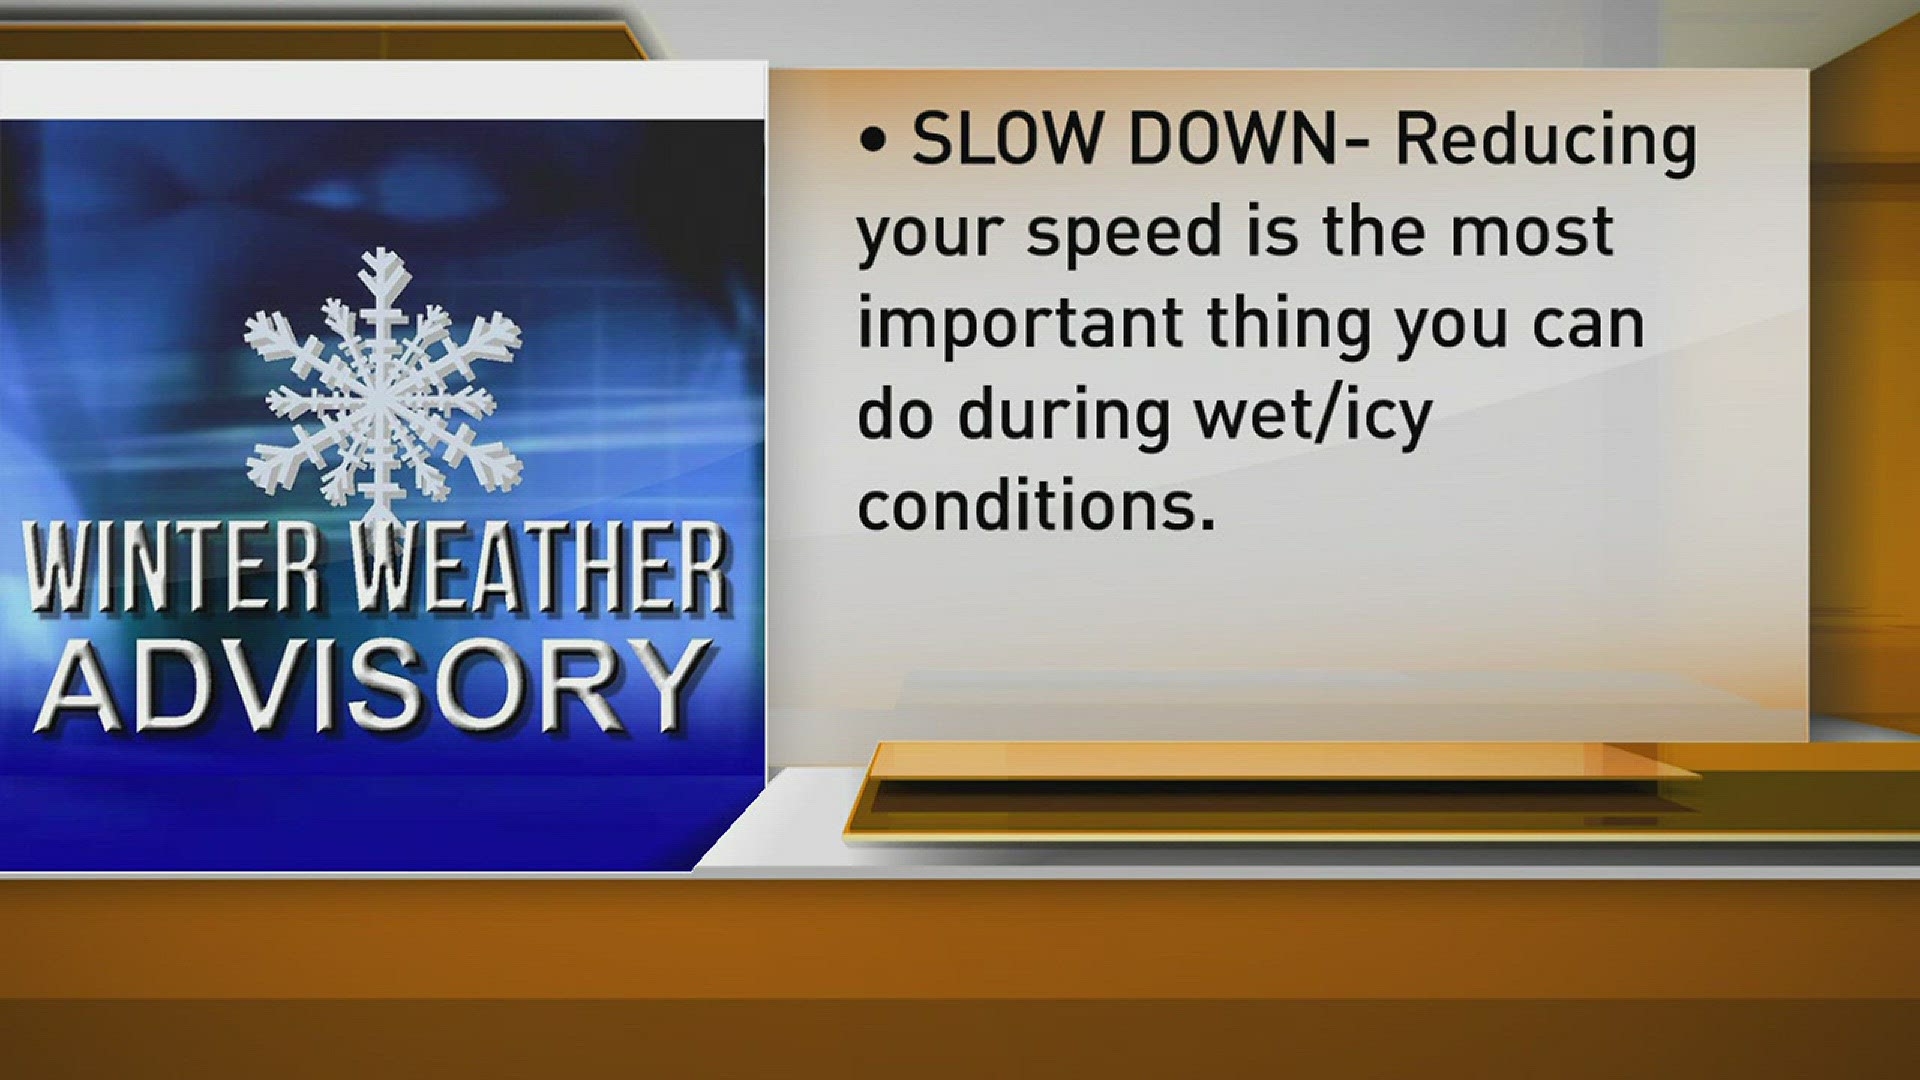 These are some tips for icy road conditions